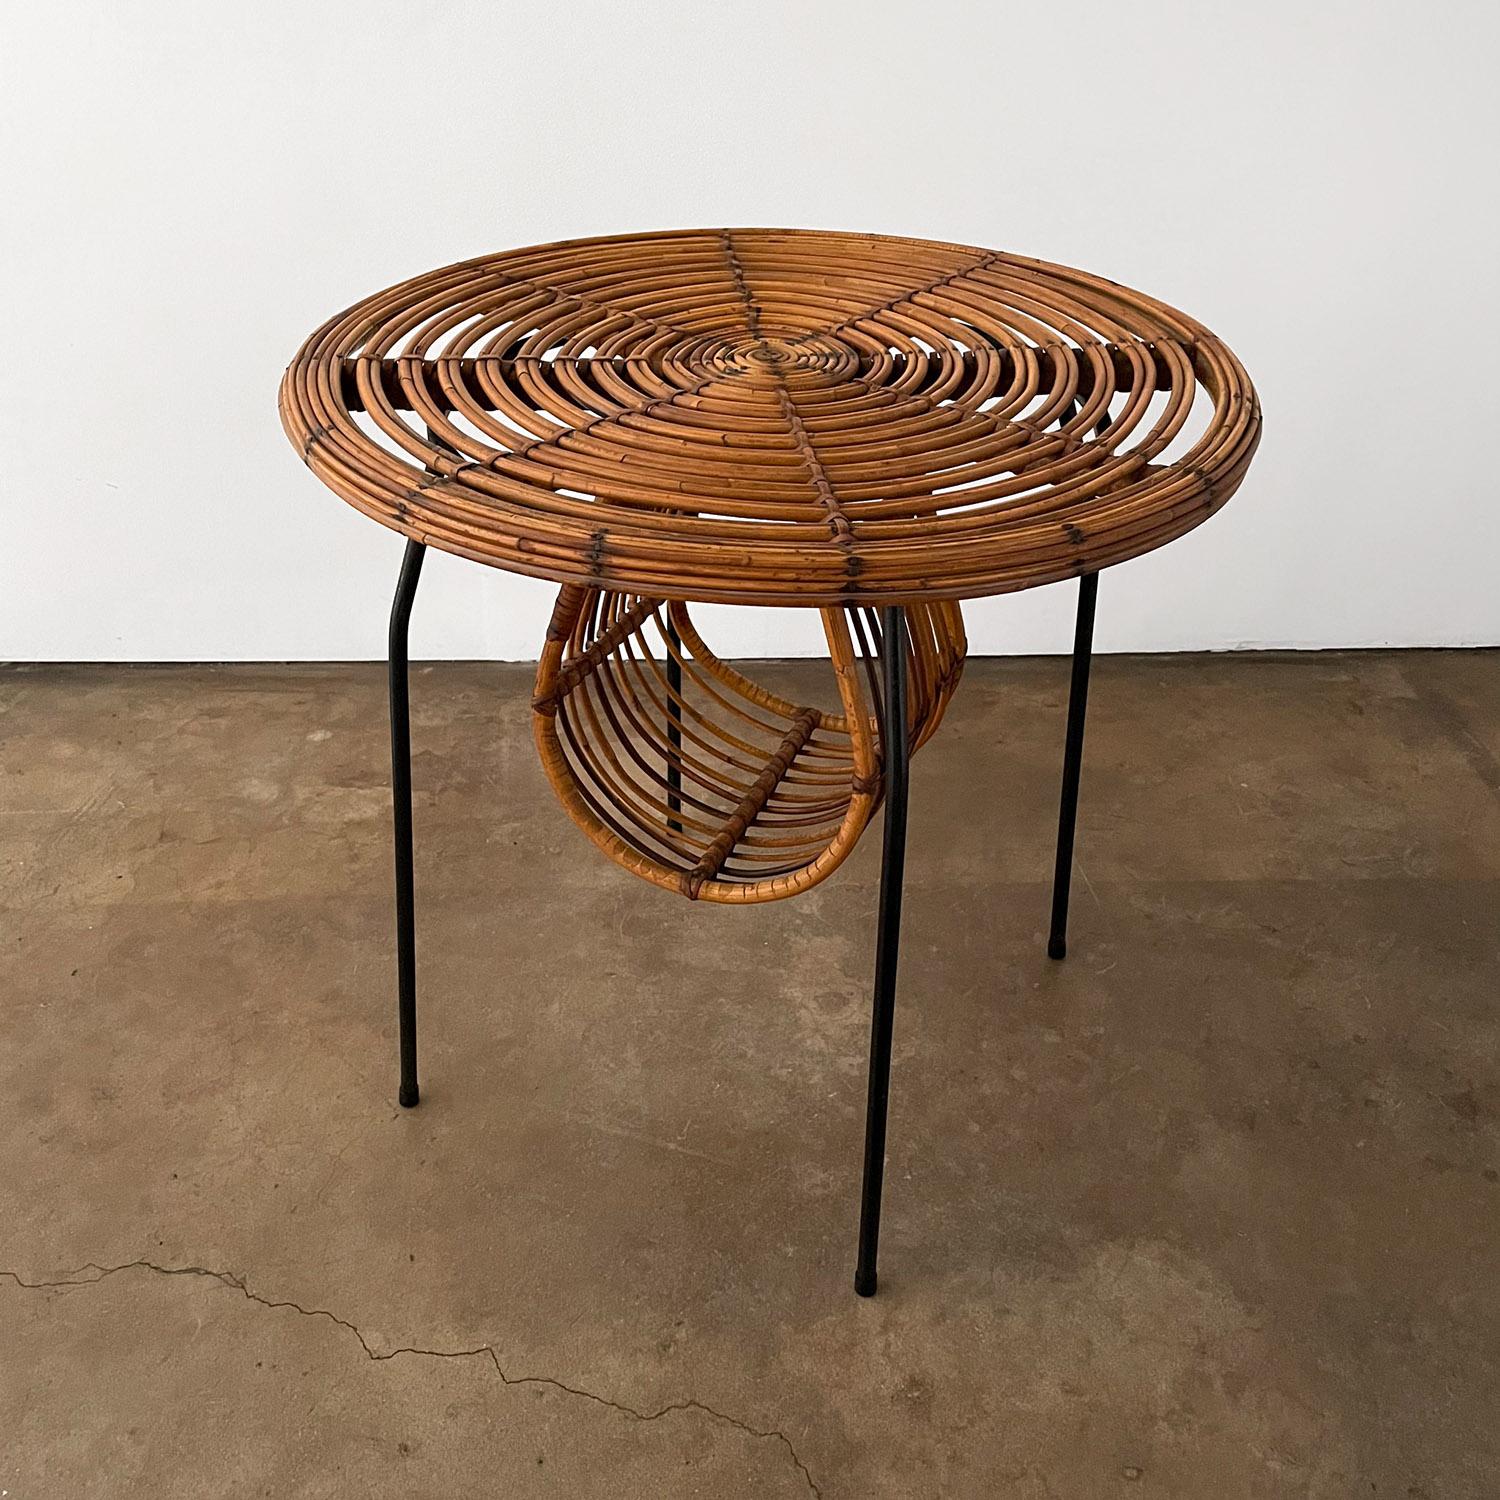 Tito Agnoli for Bonacina
Italy, circa 1970's
Sculpted rattan side table with a newspaper / magazine holder 
Tubular steel legs
Concentric rings with nailhead rivet detail
Lovely patina.
   